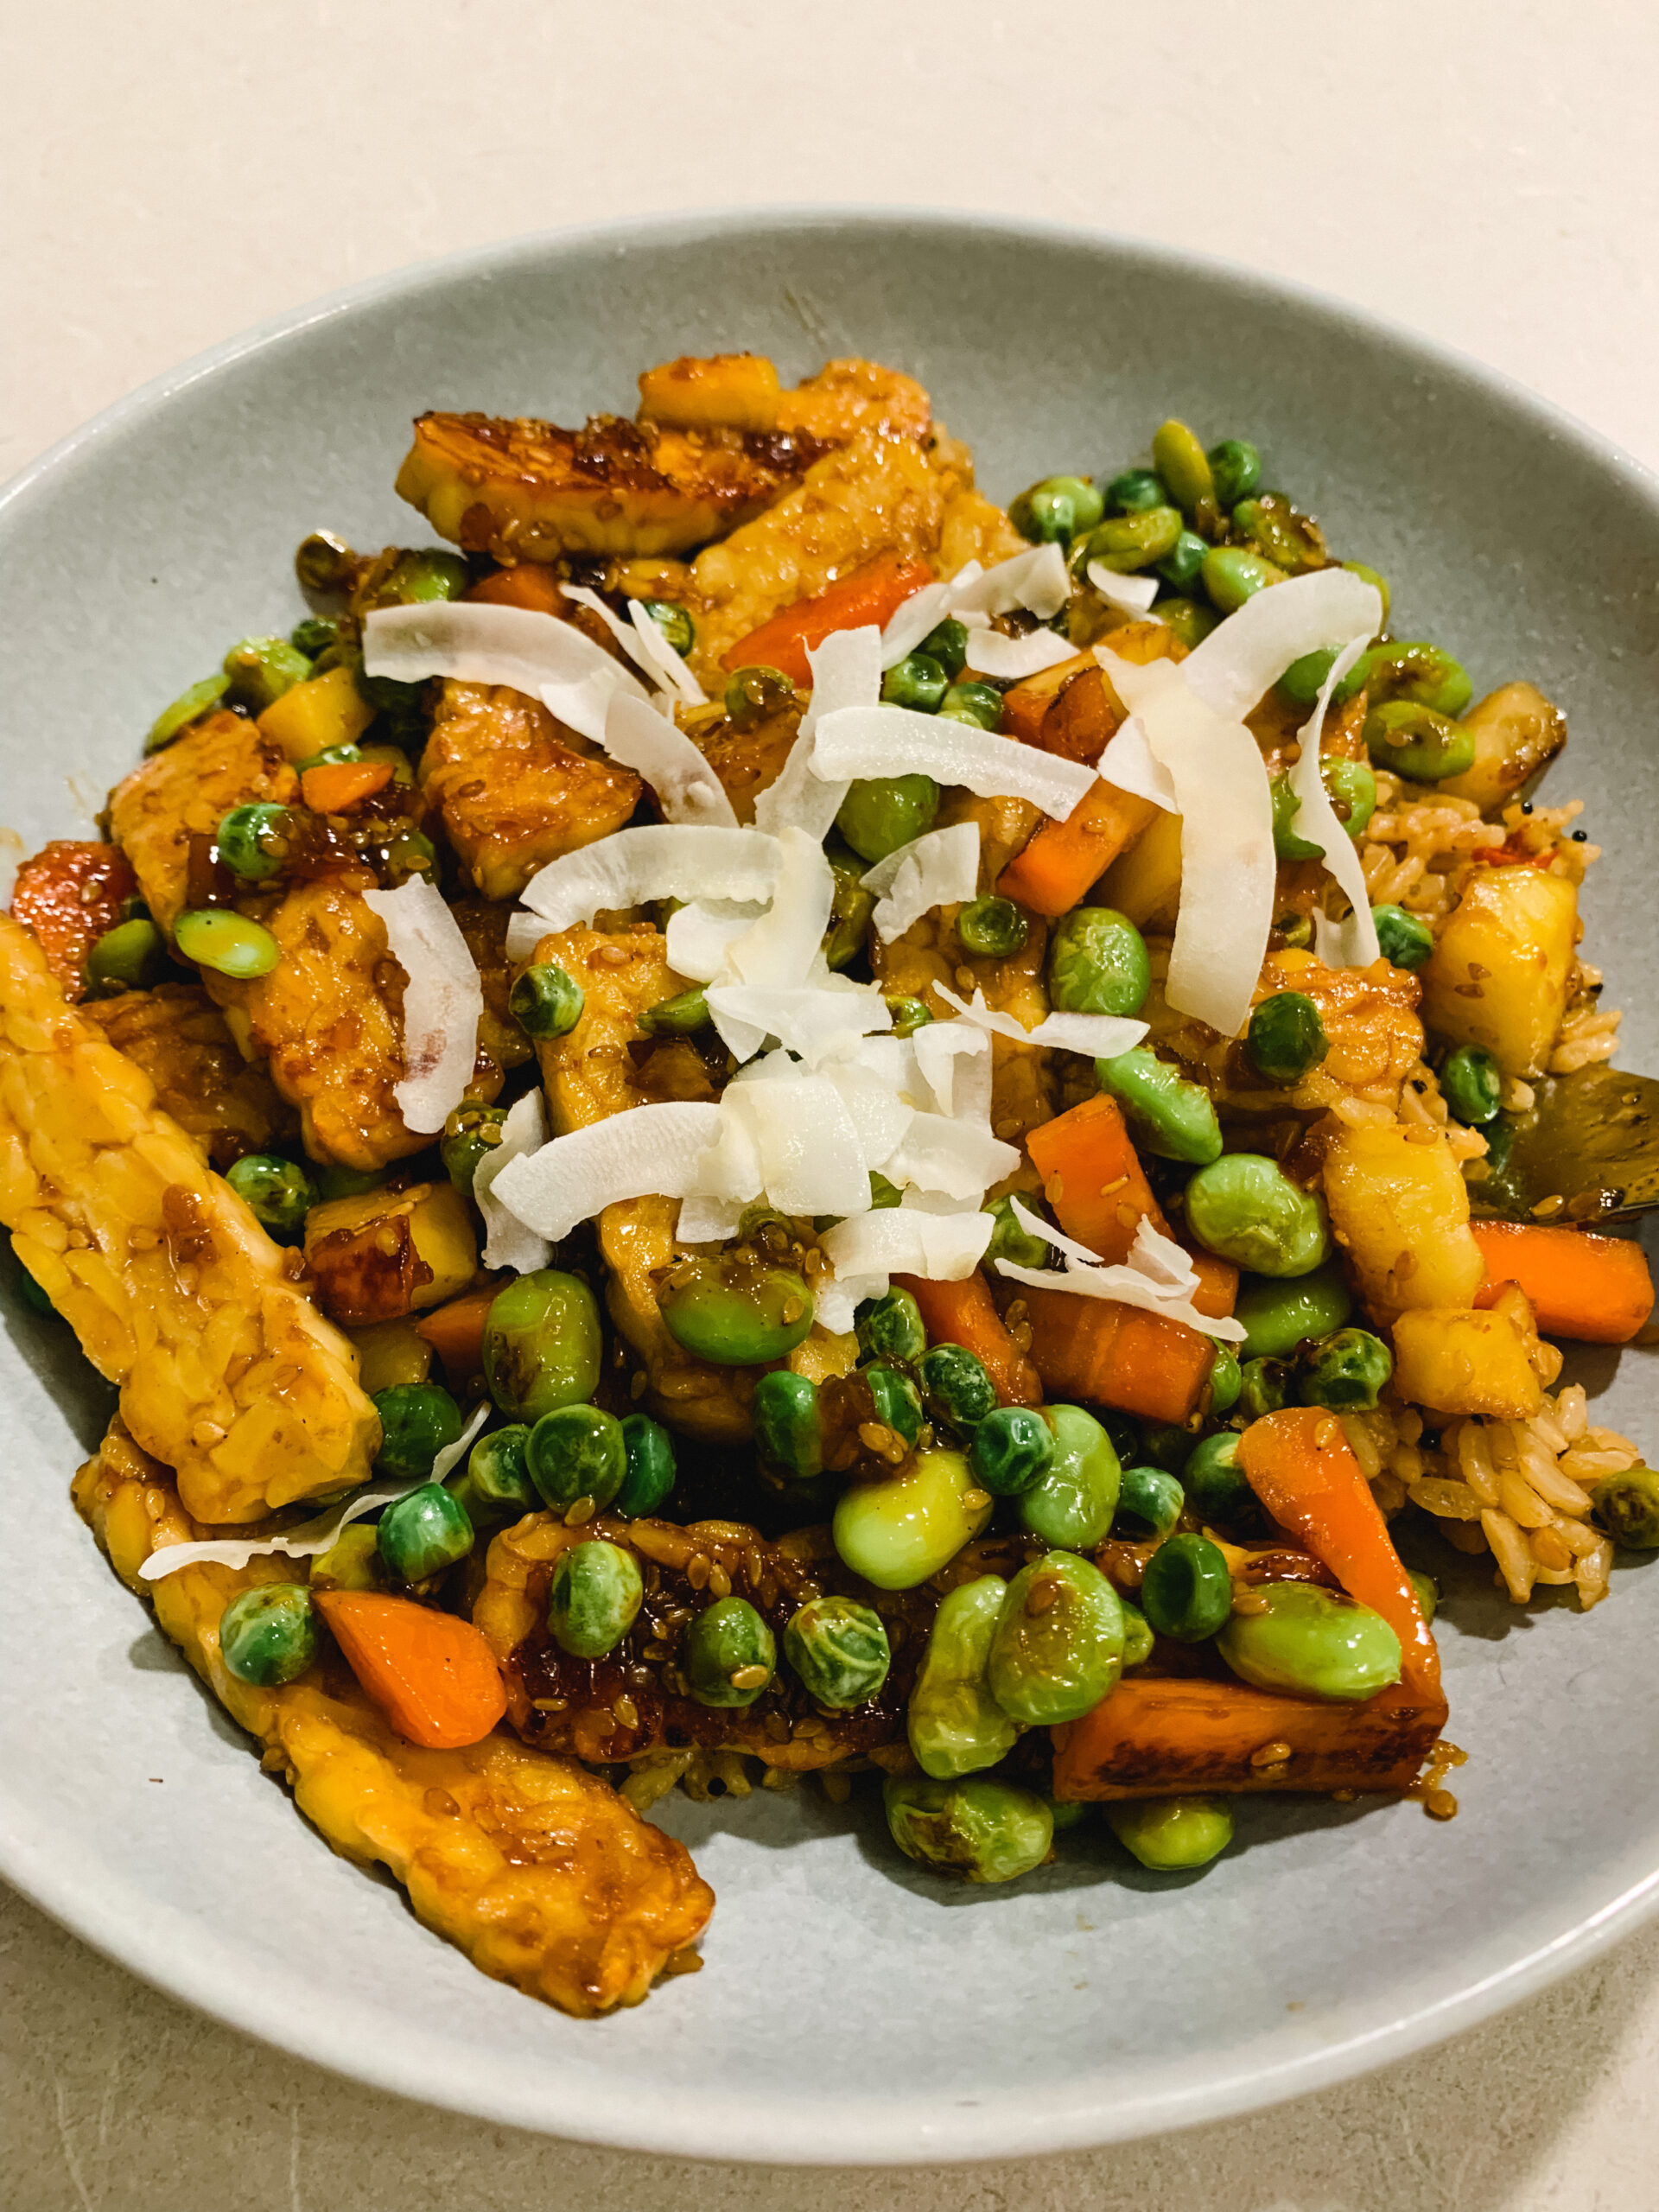 fried rice with tempeh, a great source of vegan protein